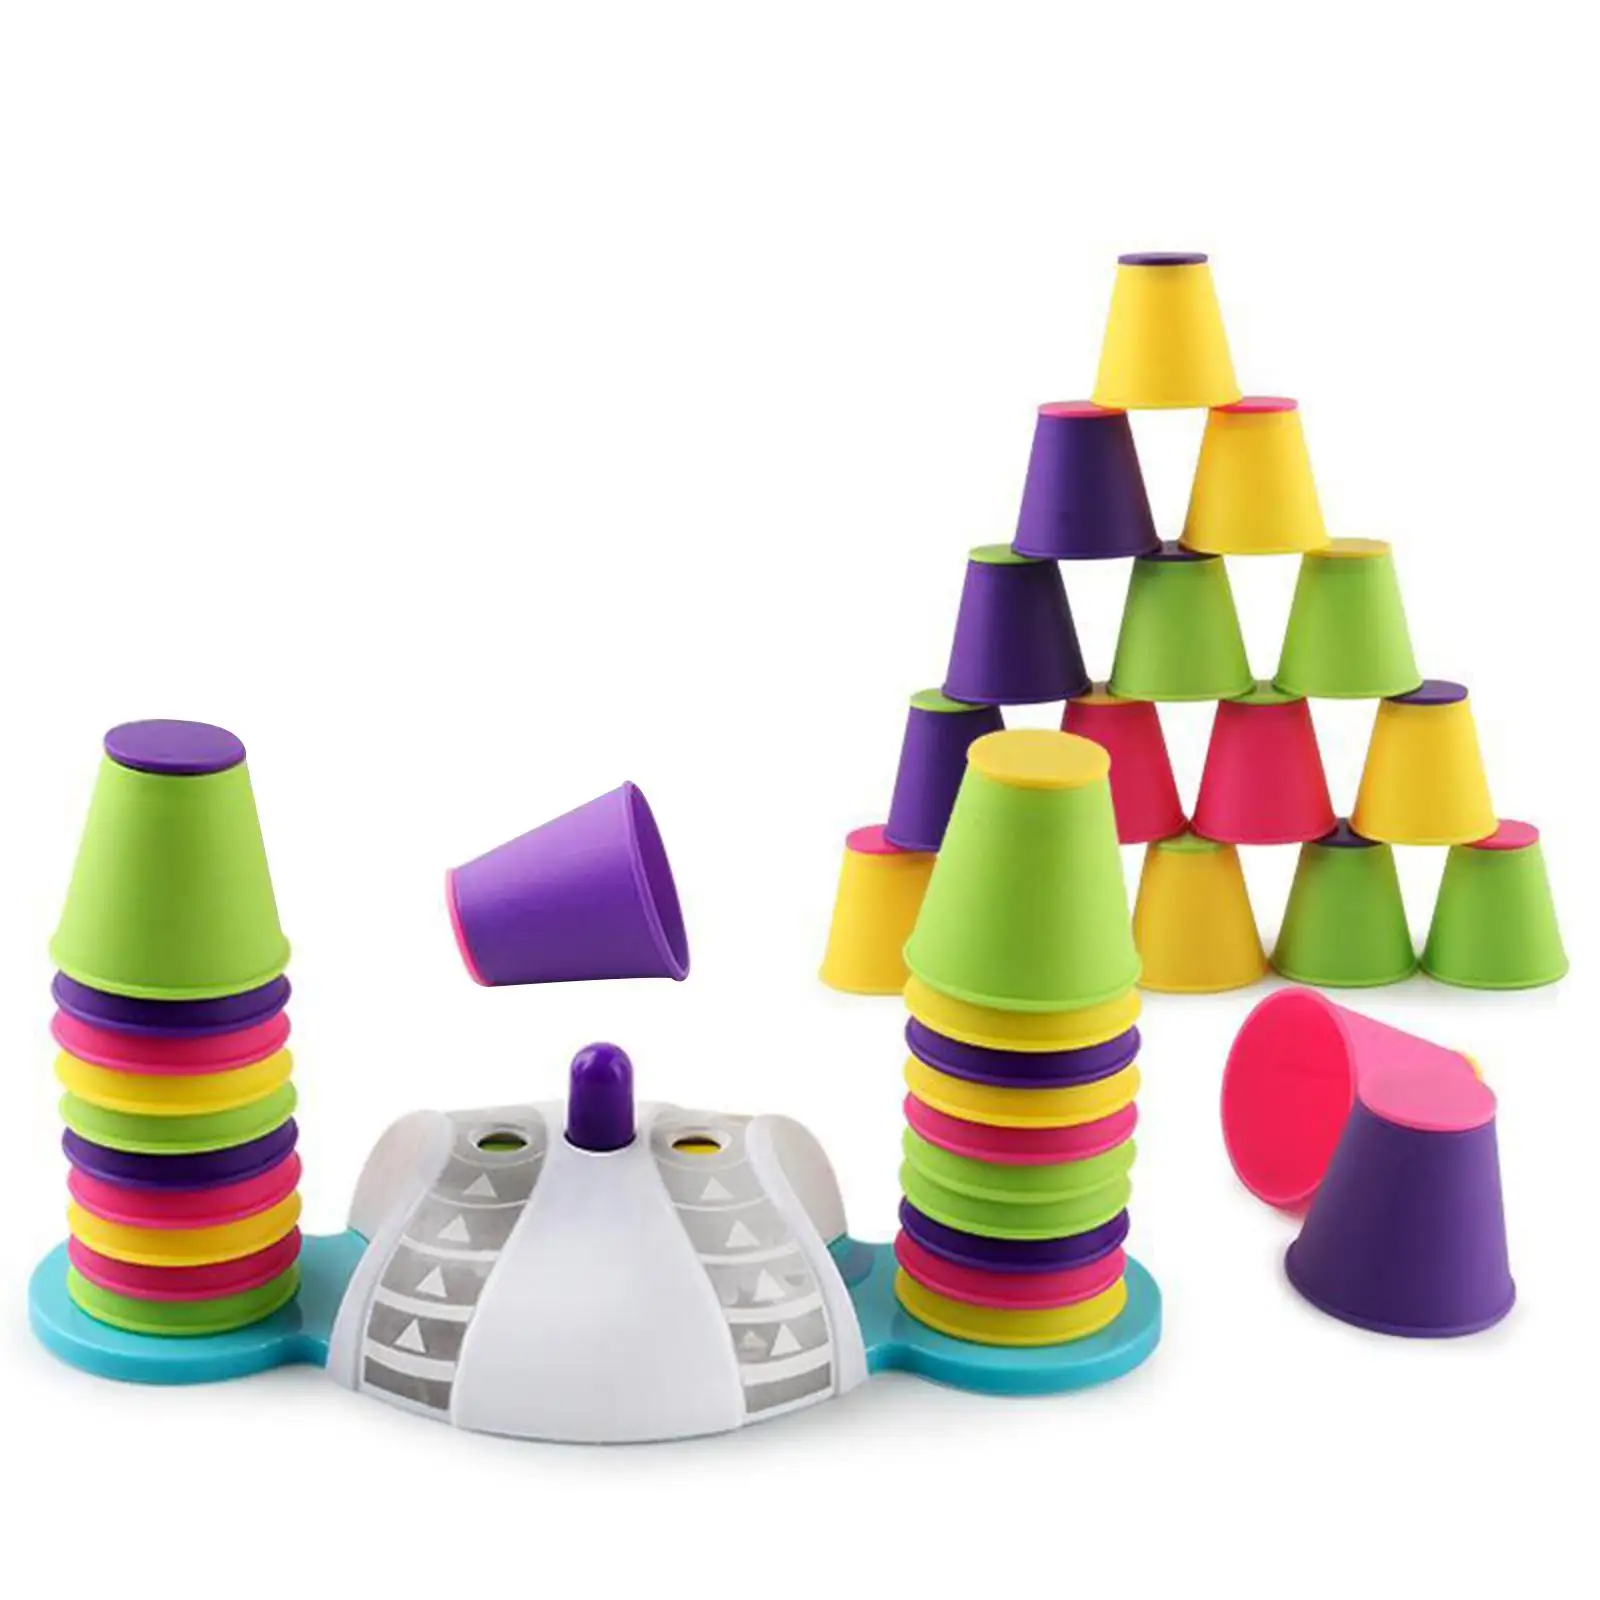 Colorful  Nesting Cups - 32 Cups  Learning Toy  Toy for Baby  - Preschool Game